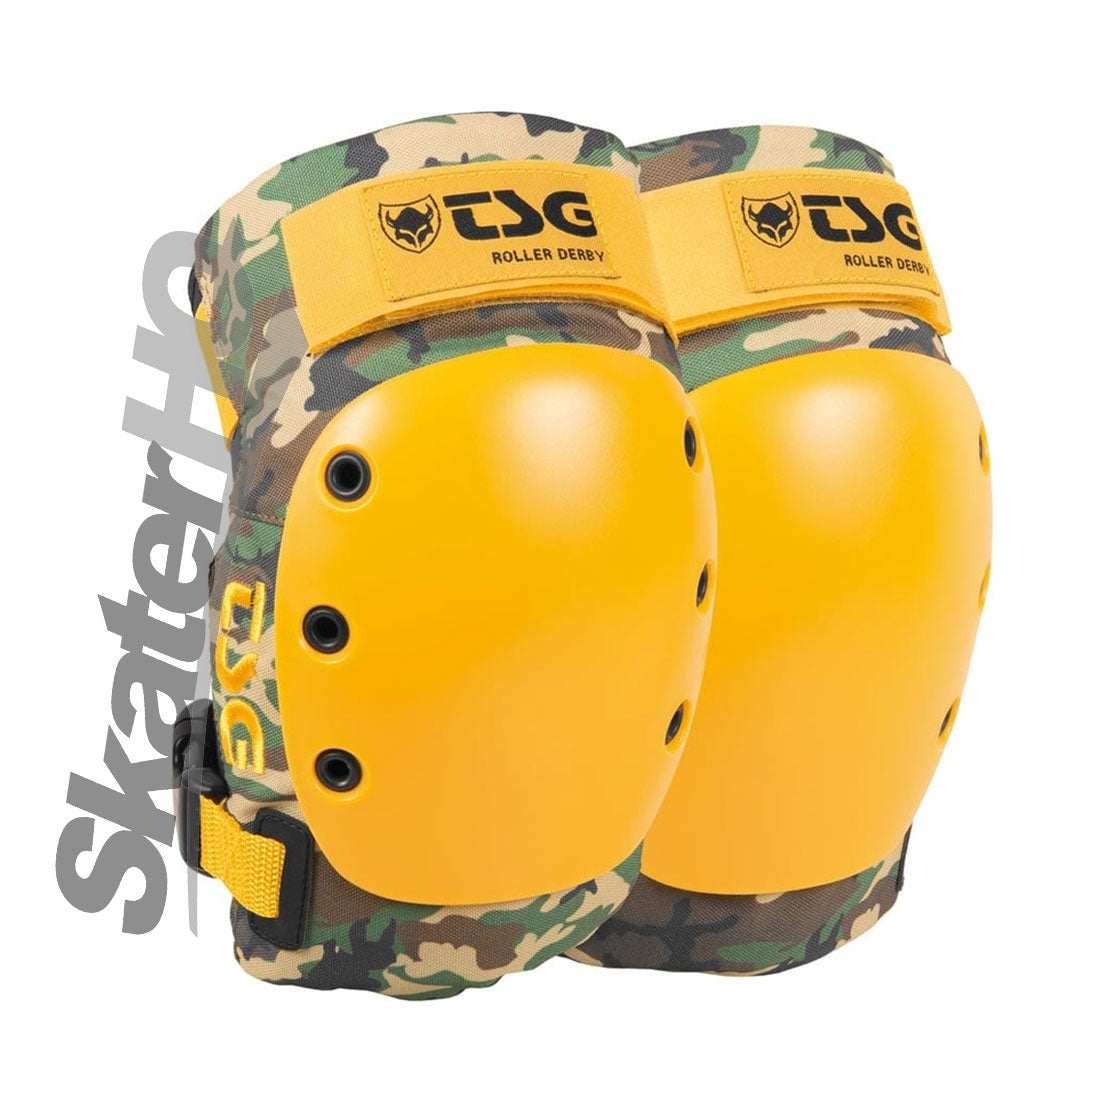 TSG Rollerderby Knee 2.0 Camo - Small Protective Gear